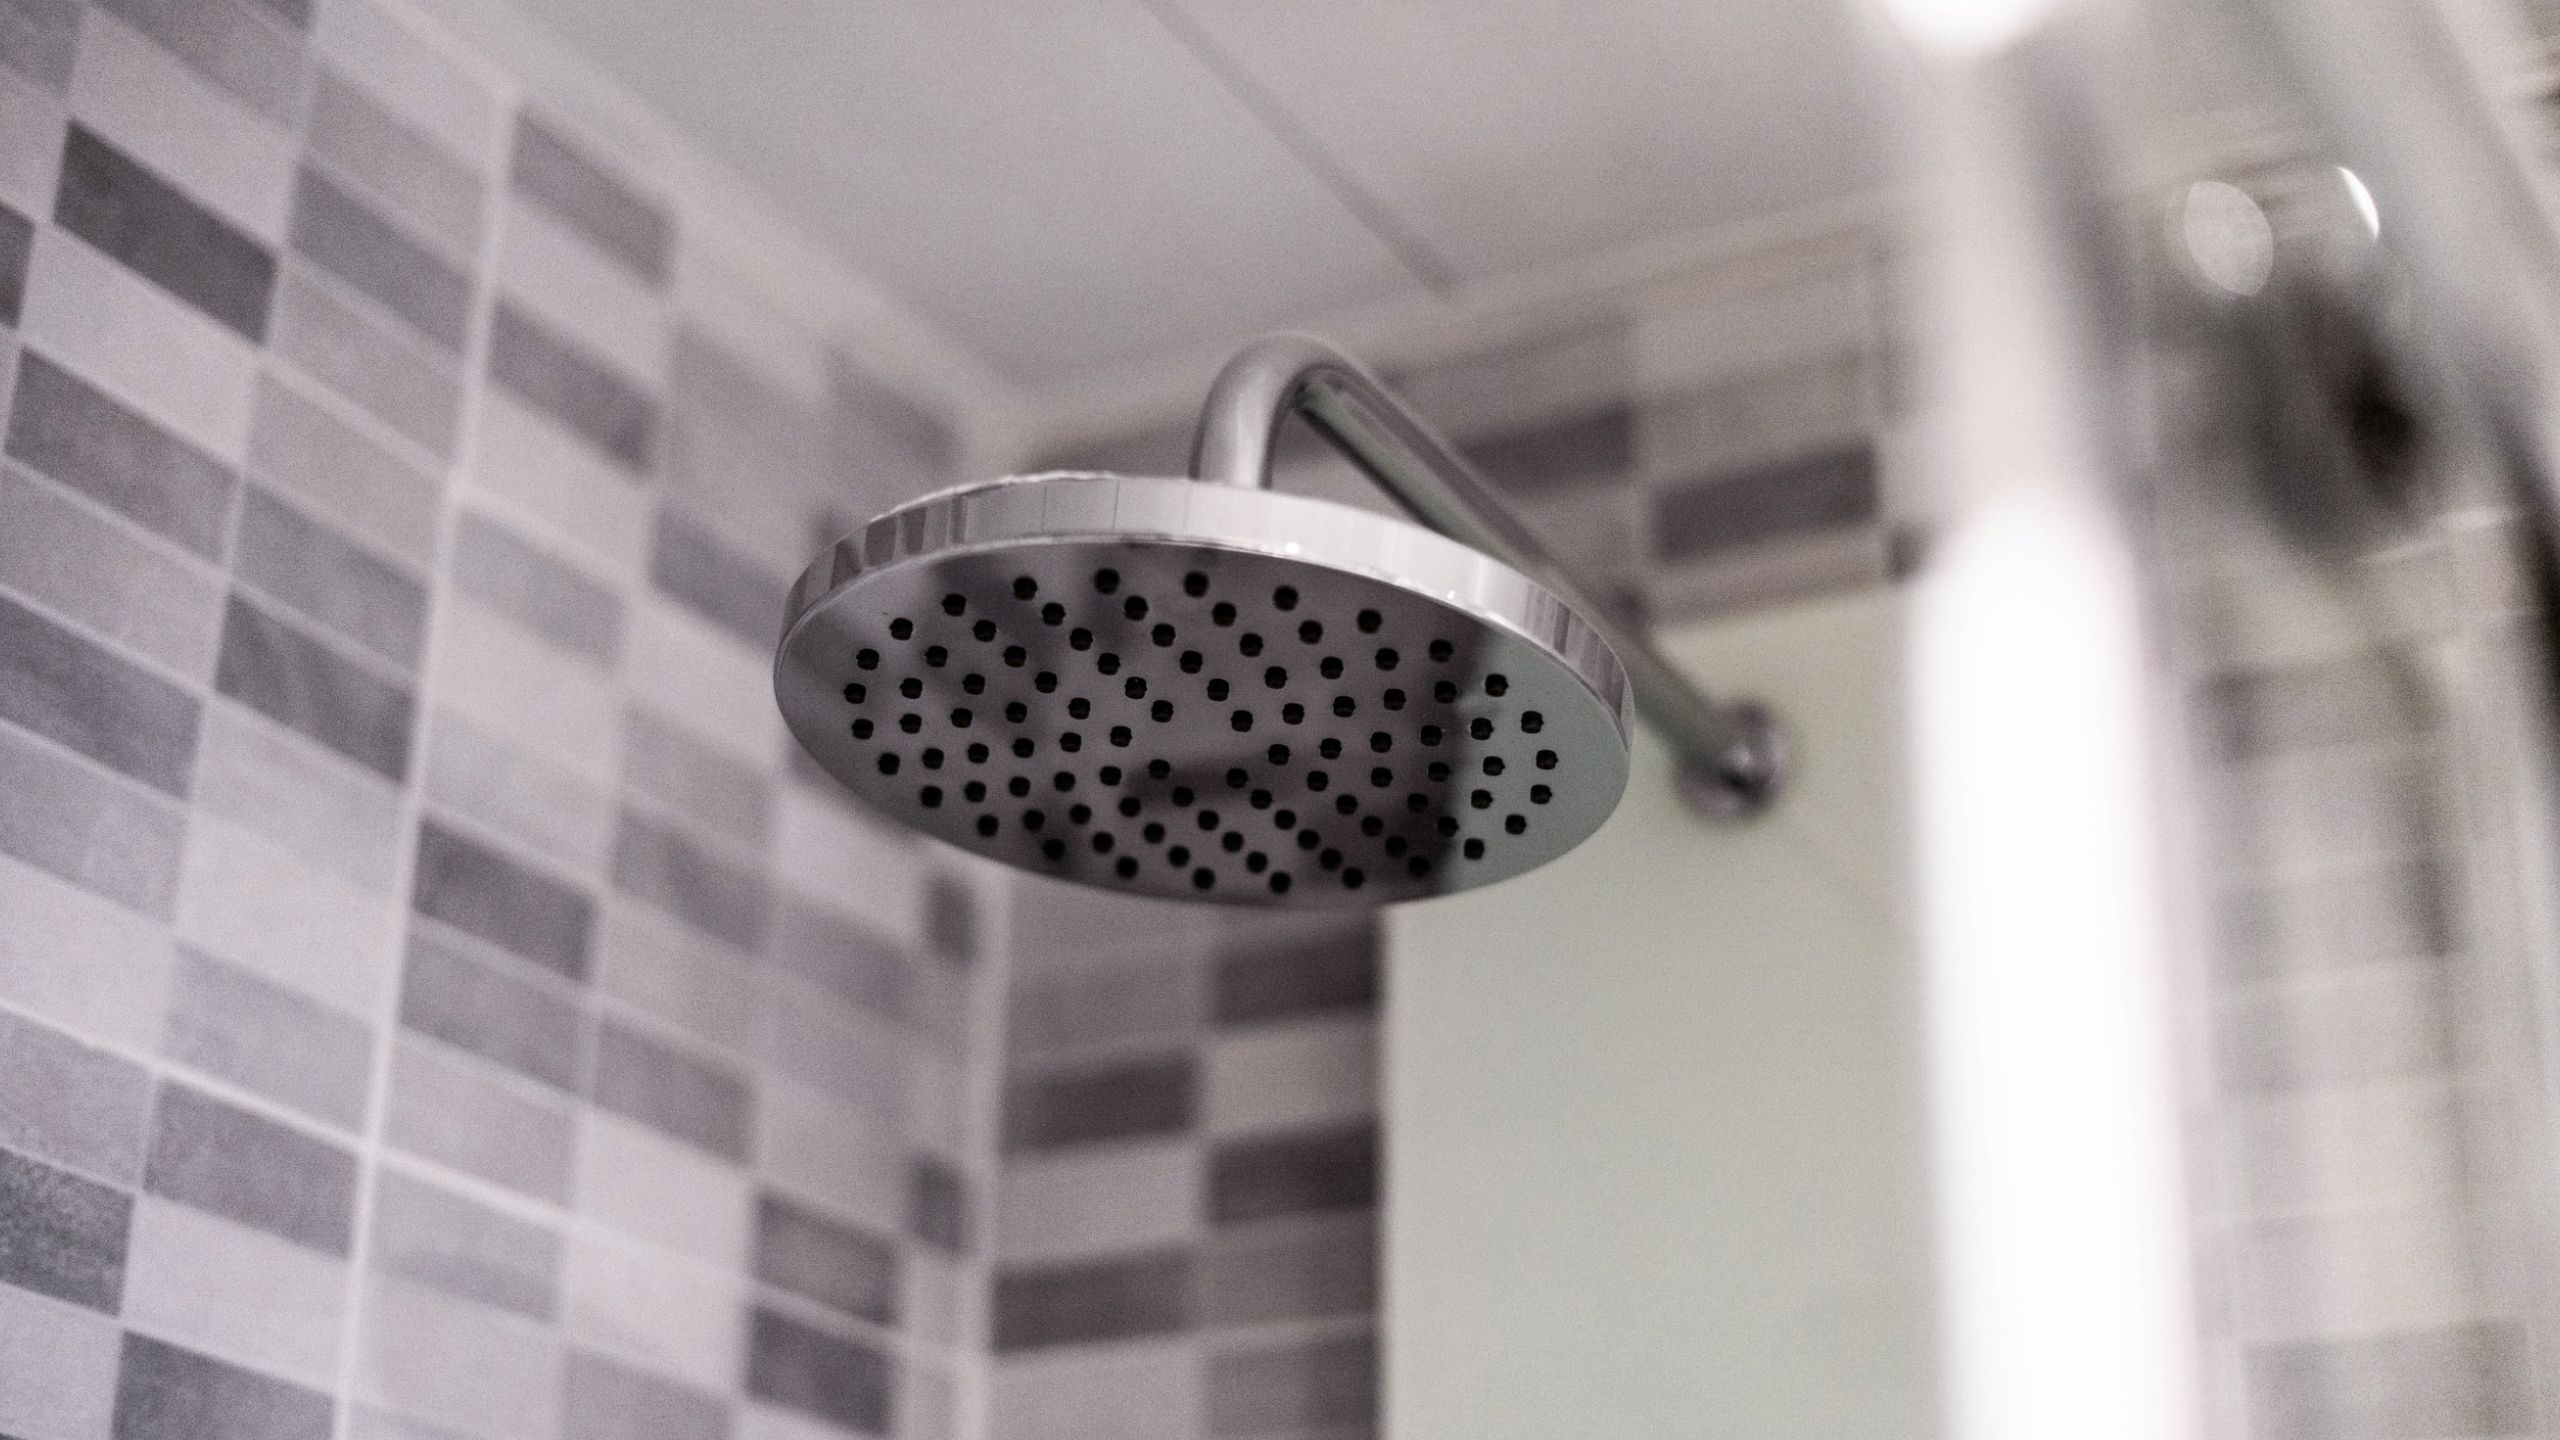 A black and white image of a dripping shower head to illustrate that a cold shower can help wake you up after a poor night's sleep 